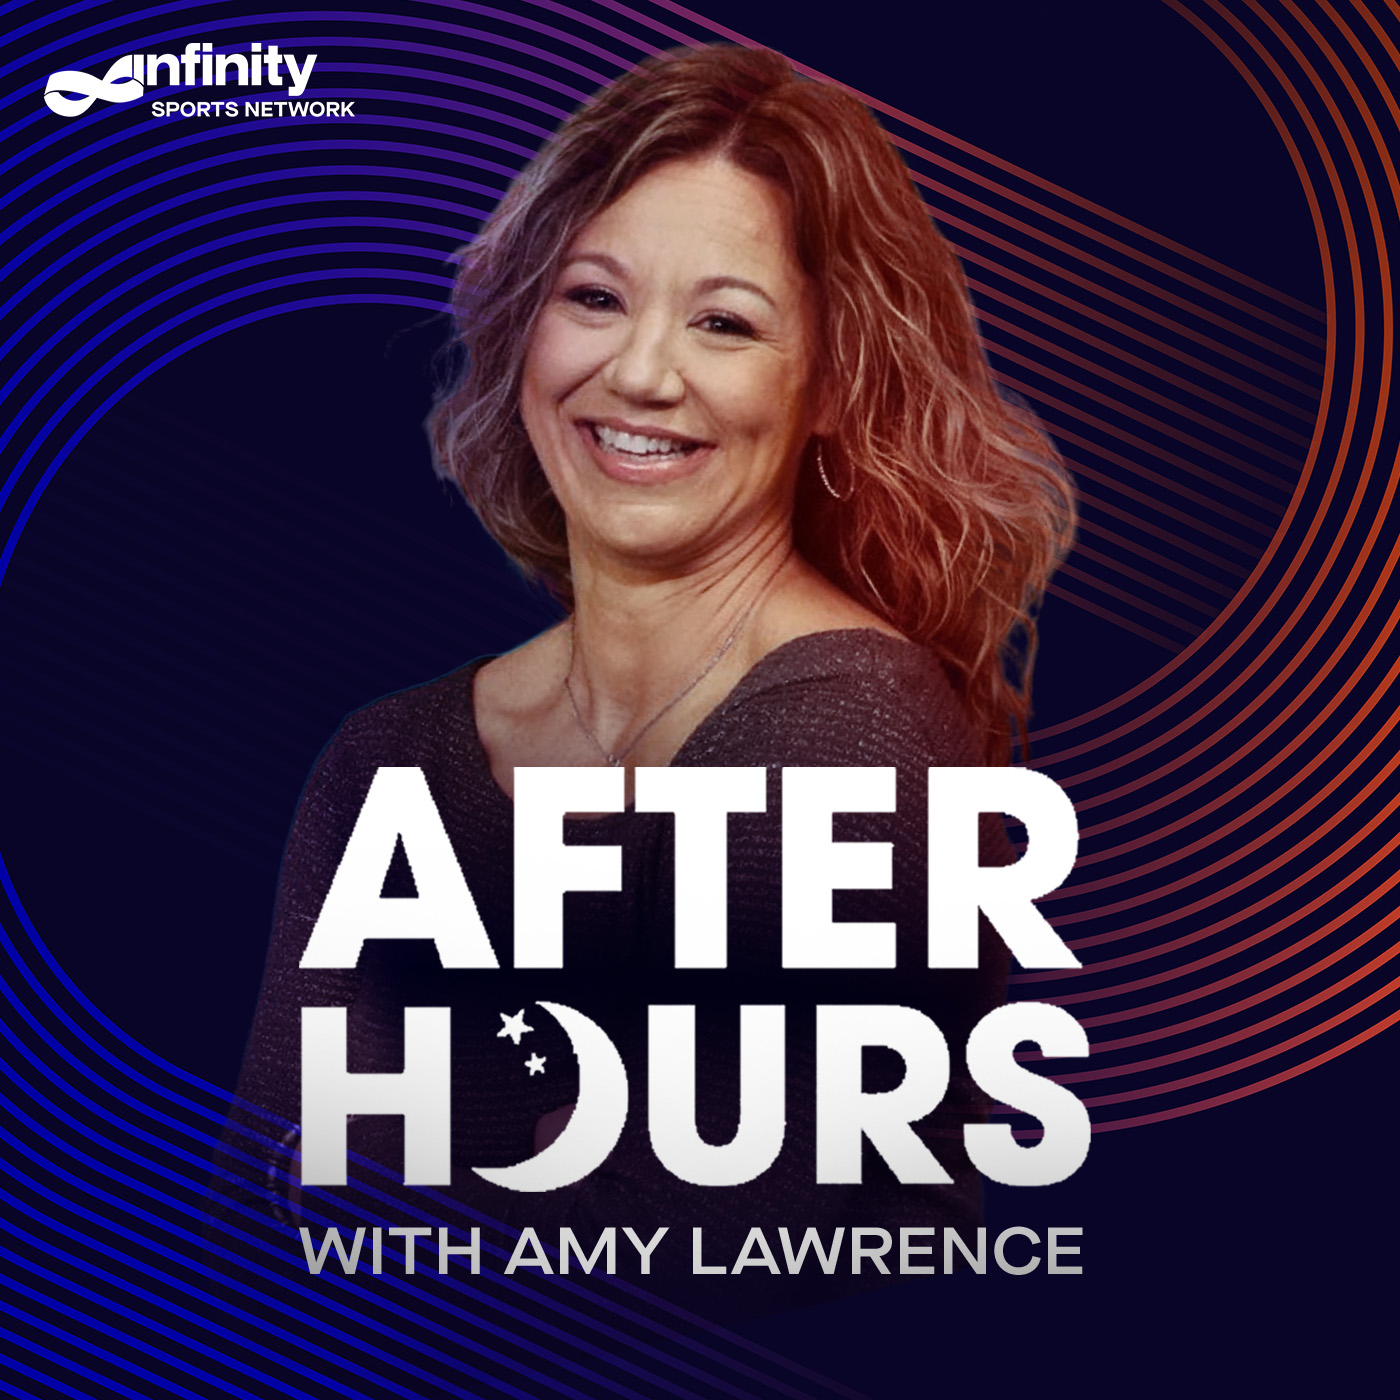 10-29-21 After Hours with Amy Lawrence PODCAST: Hour 4